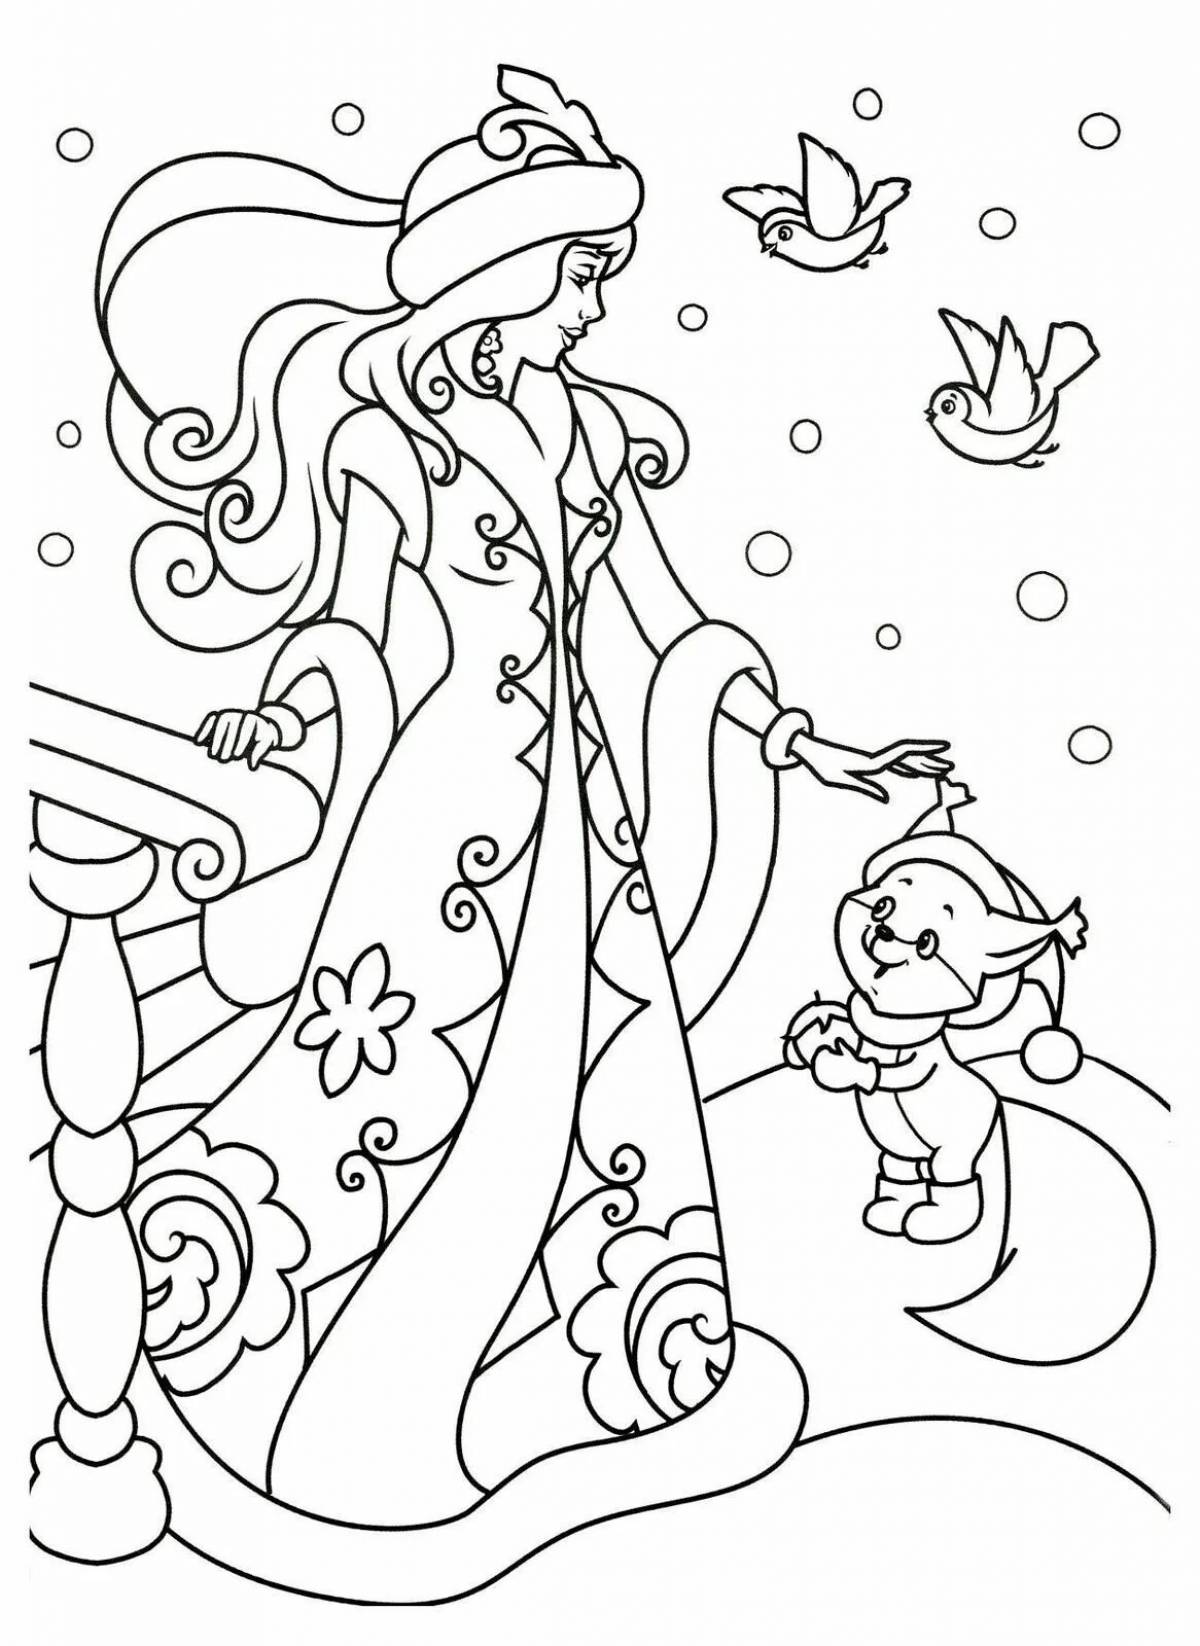 Coloring page luxury snow maiden